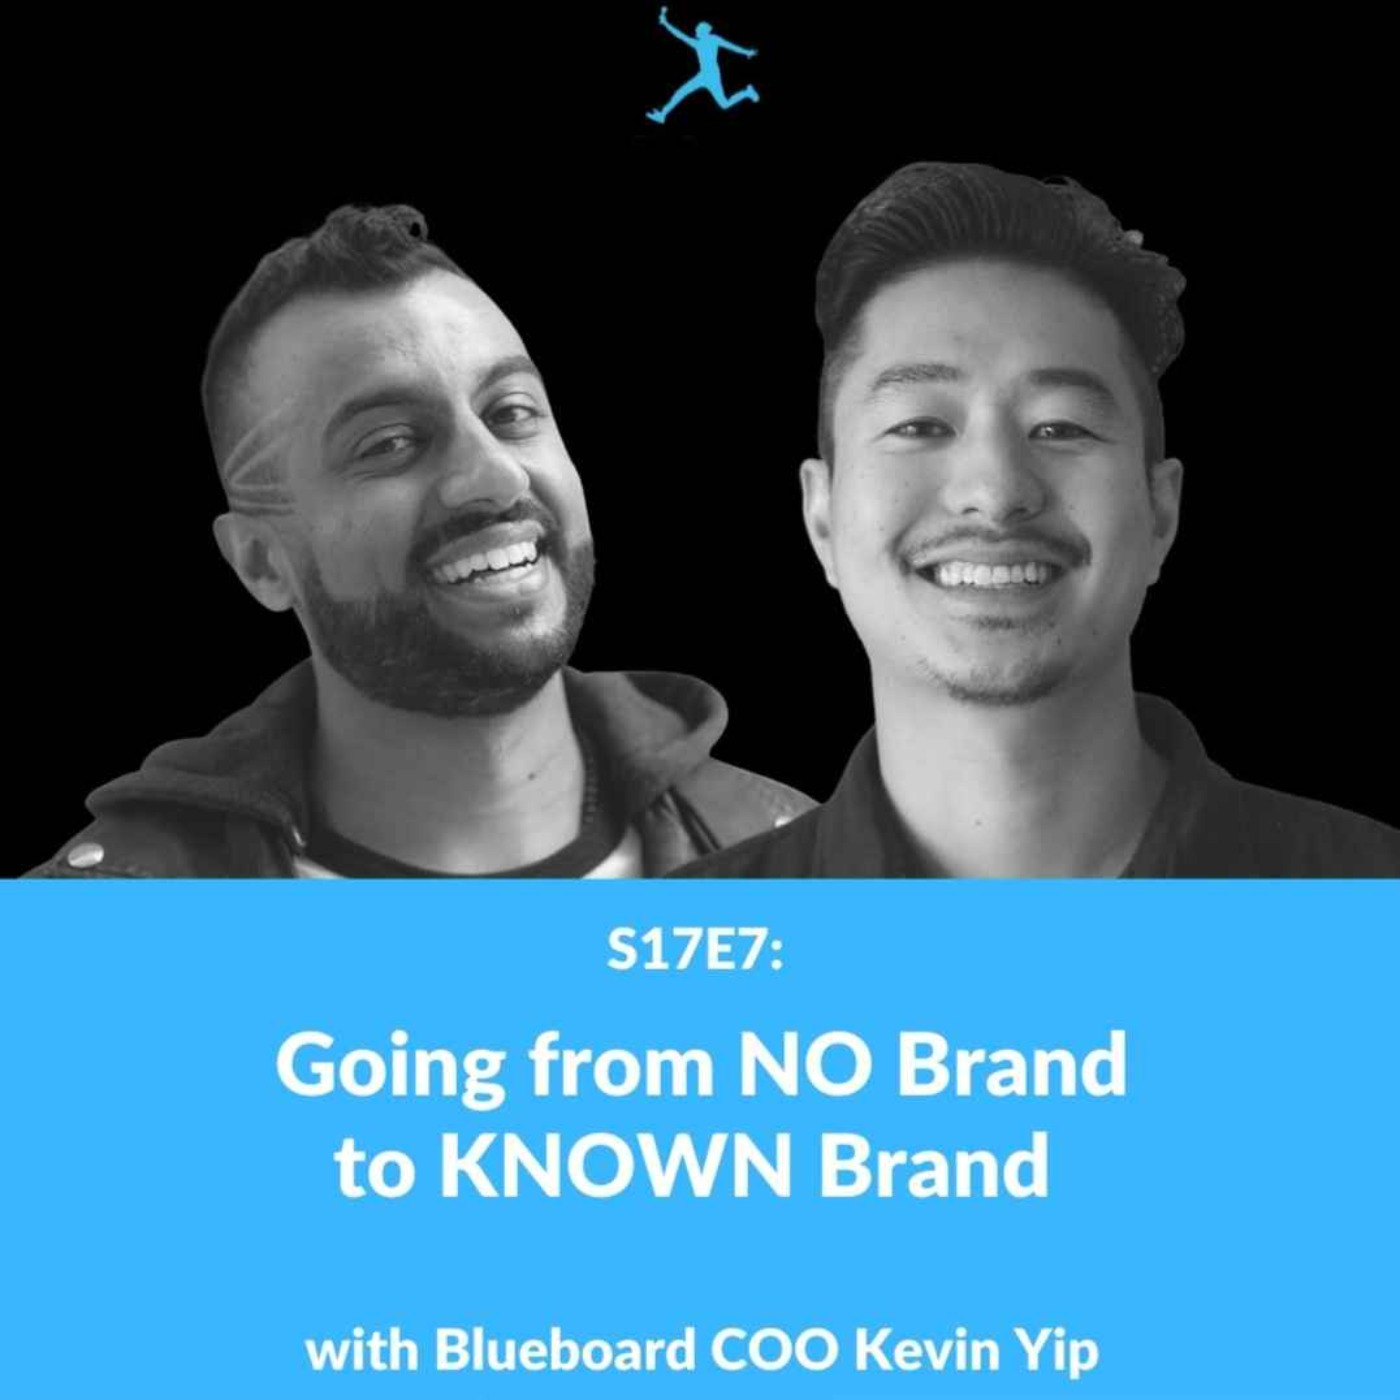 S17E7: Going from NO Brand to KNOWN Brand with Blueboard COO Kevin Yip